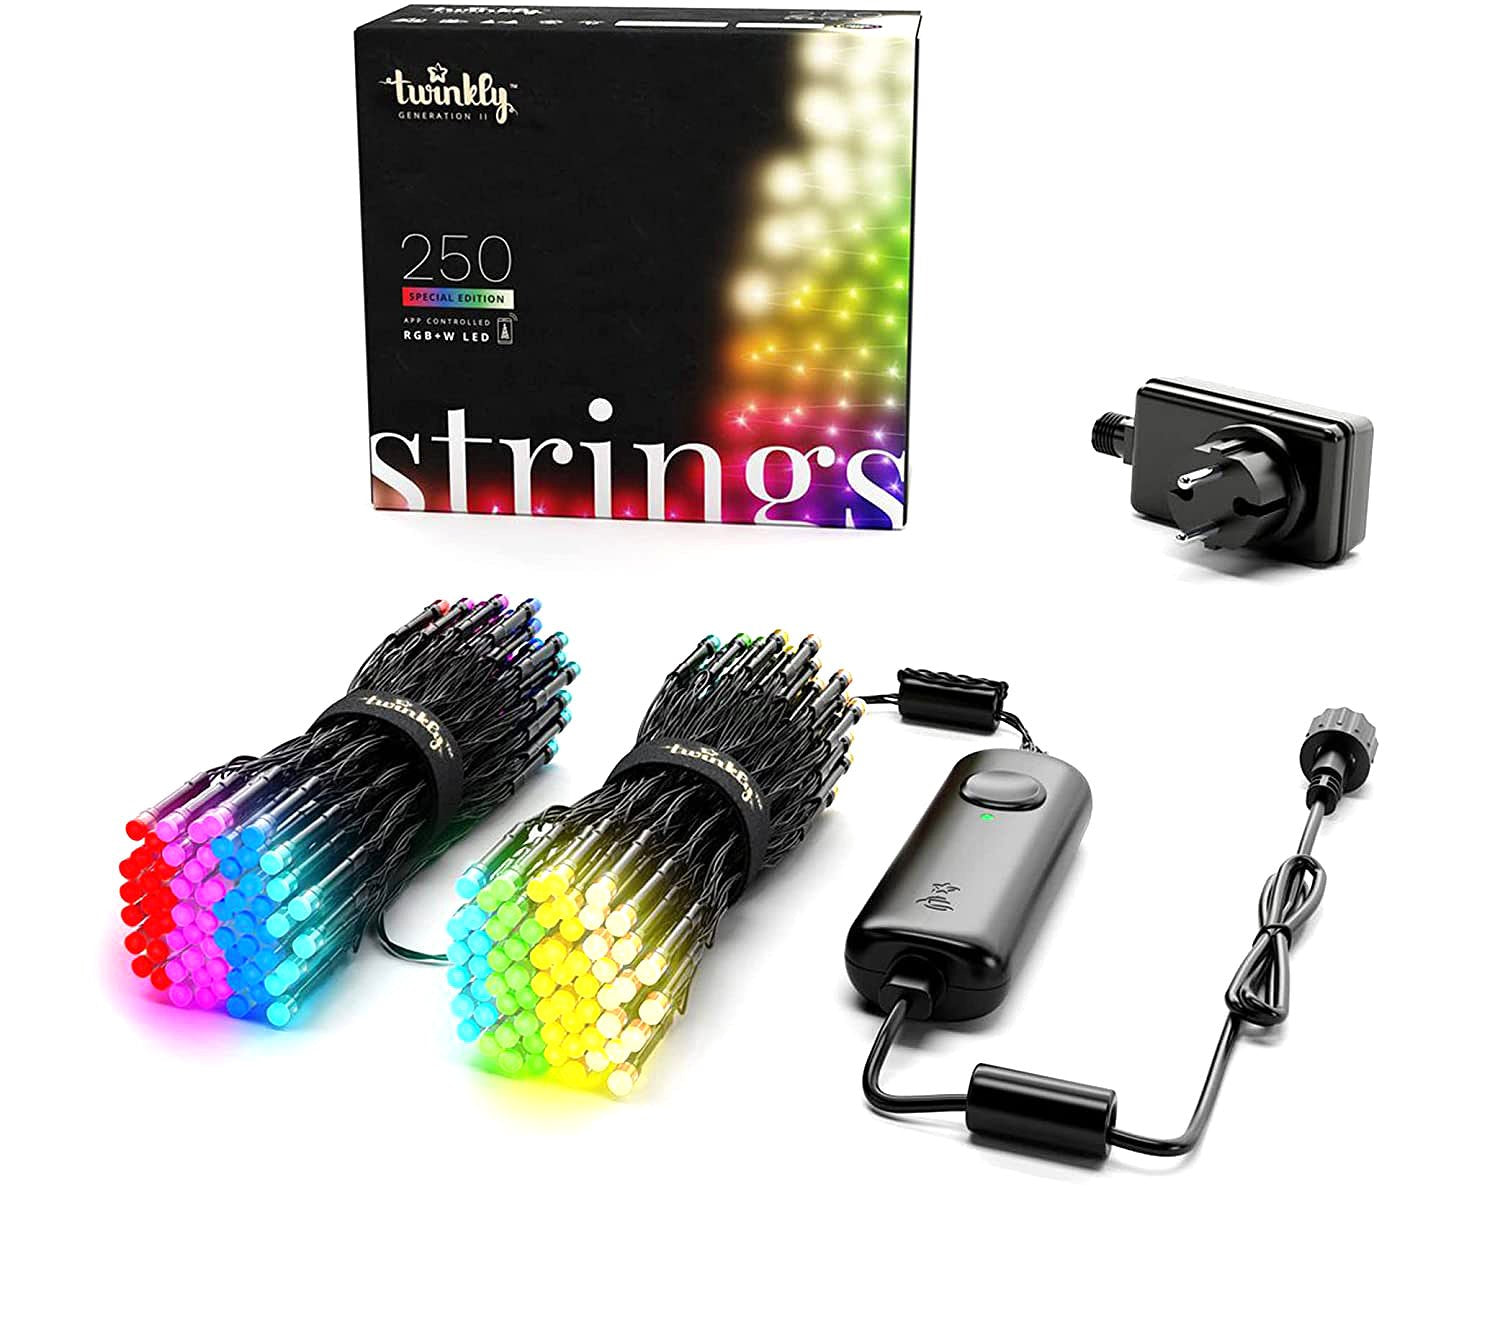 Twinkly Strings RGBW 250 lamps [Black & Green]